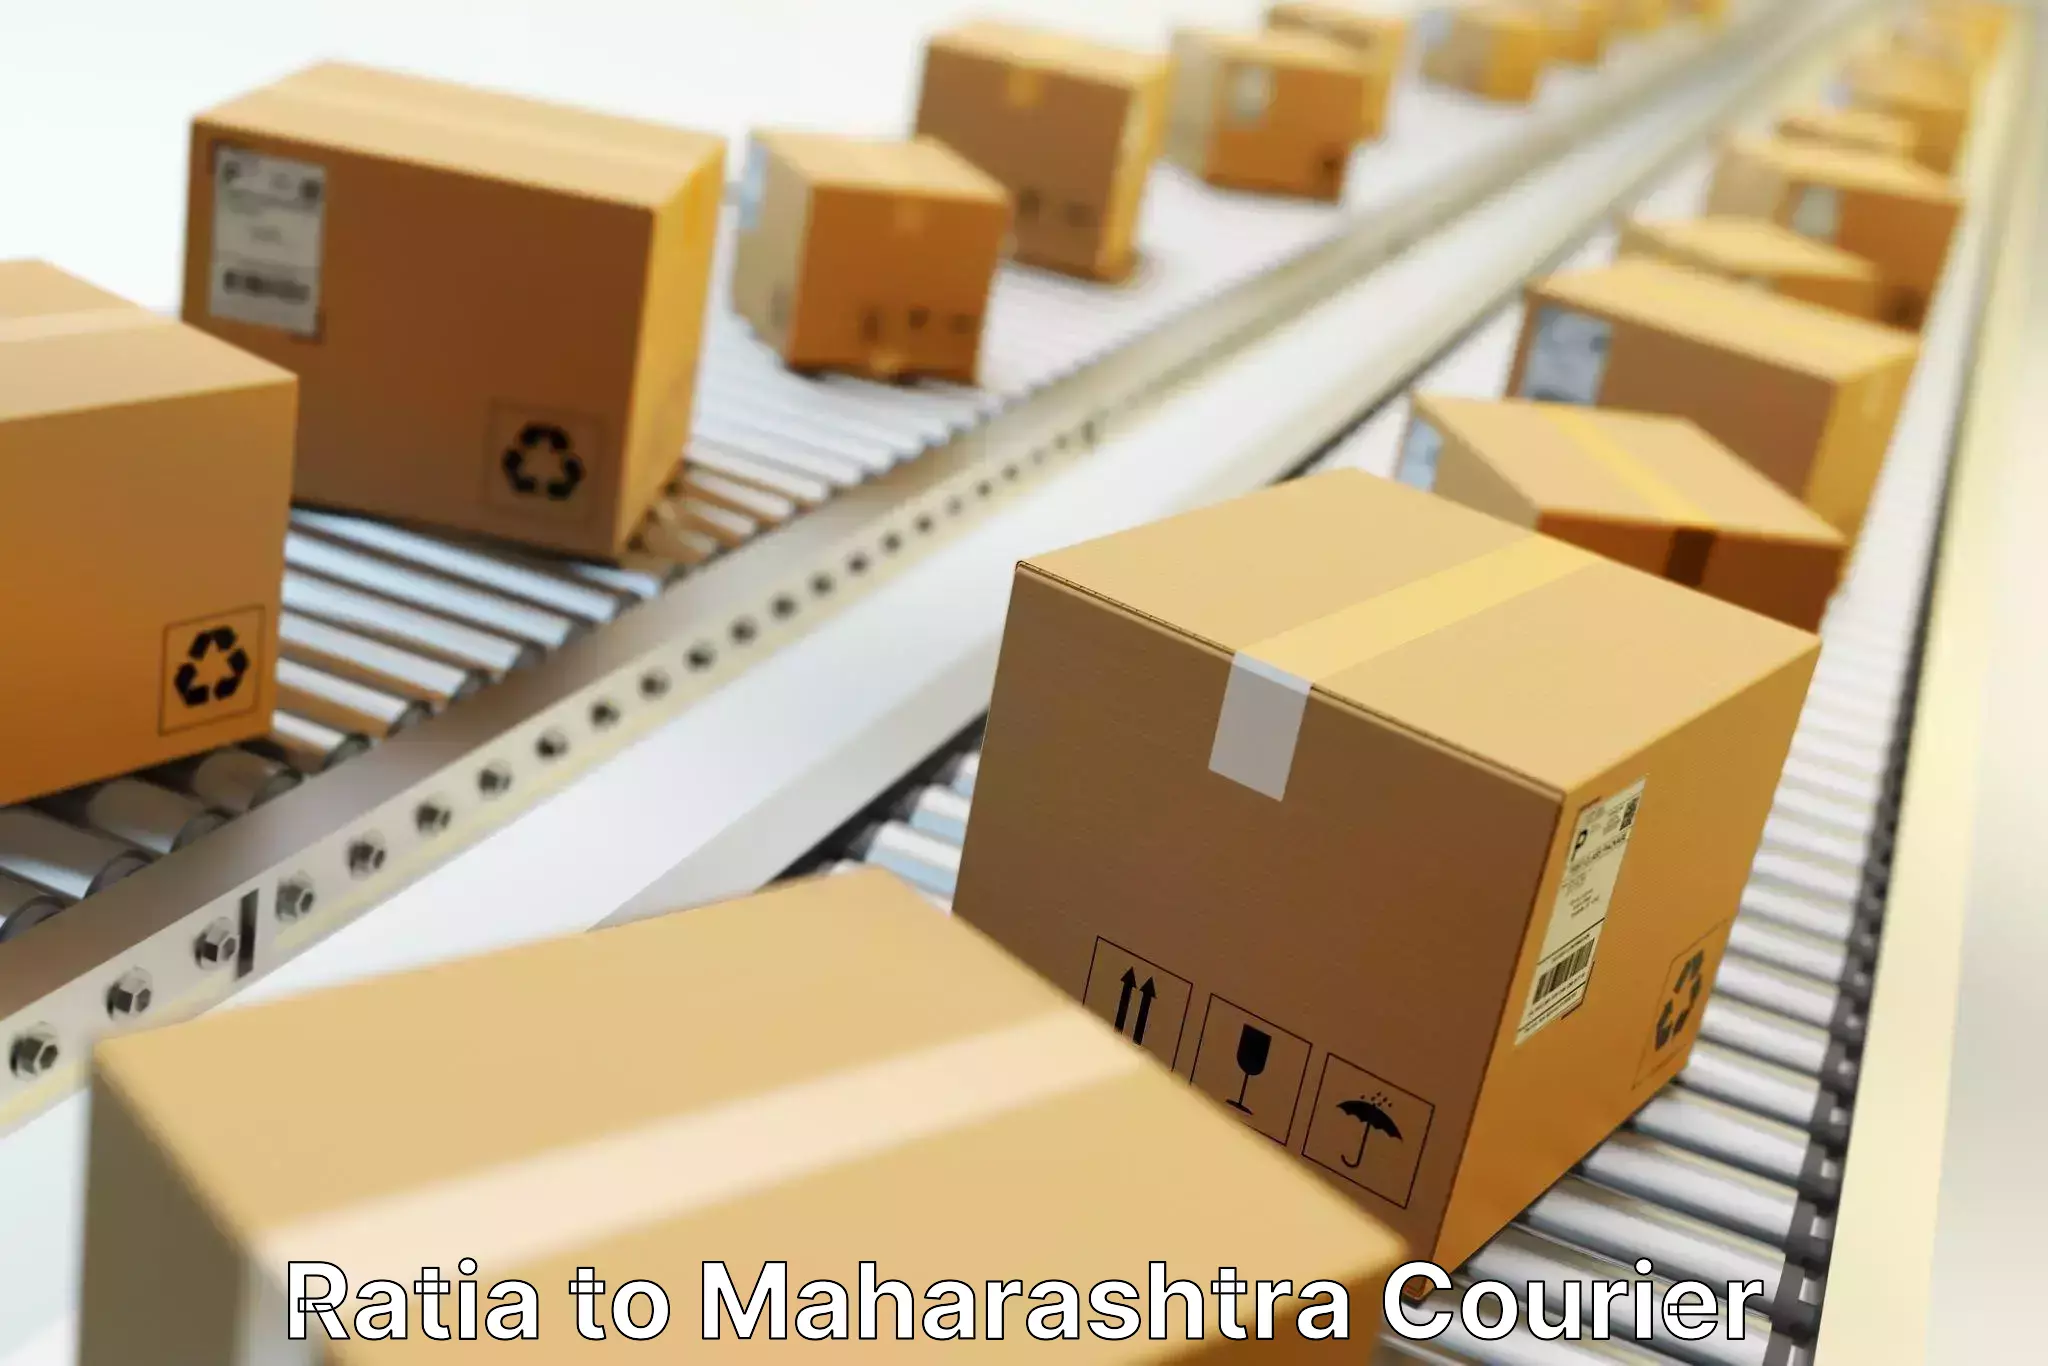 Automated parcel services Ratia to Bhiwandi